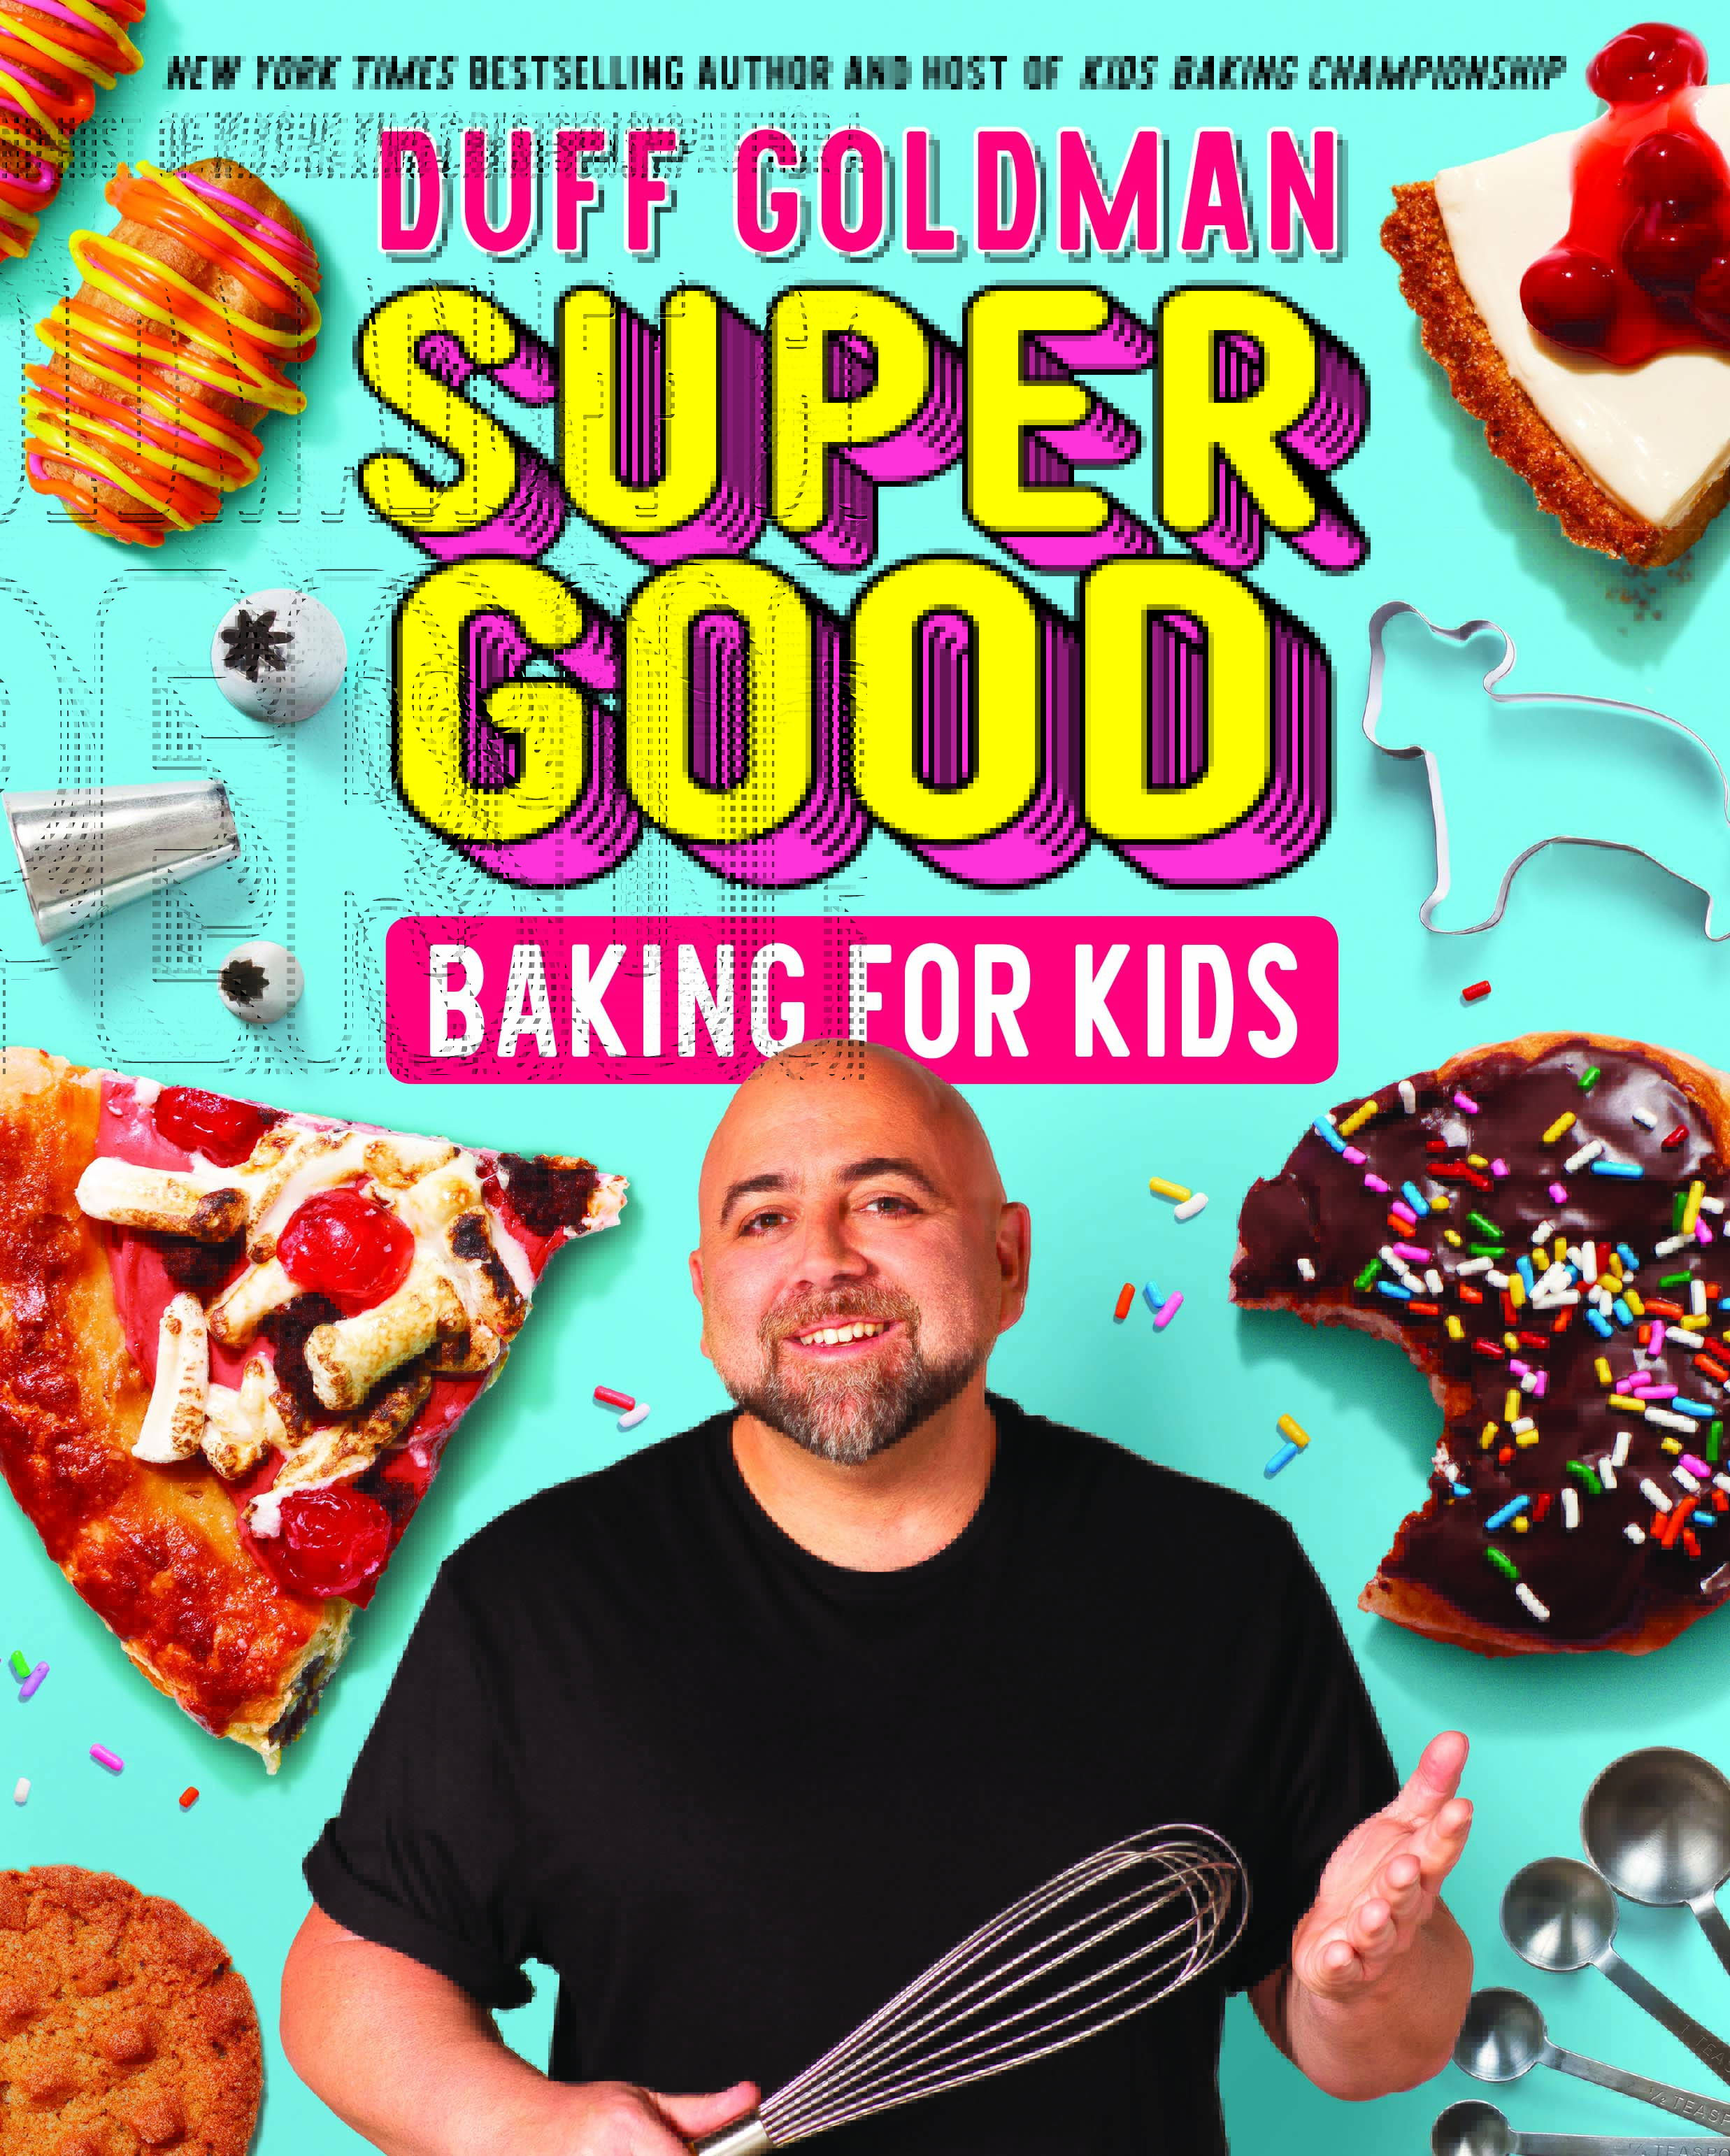 Virtual event with Duff Goldman/Super Good Baking for Kids